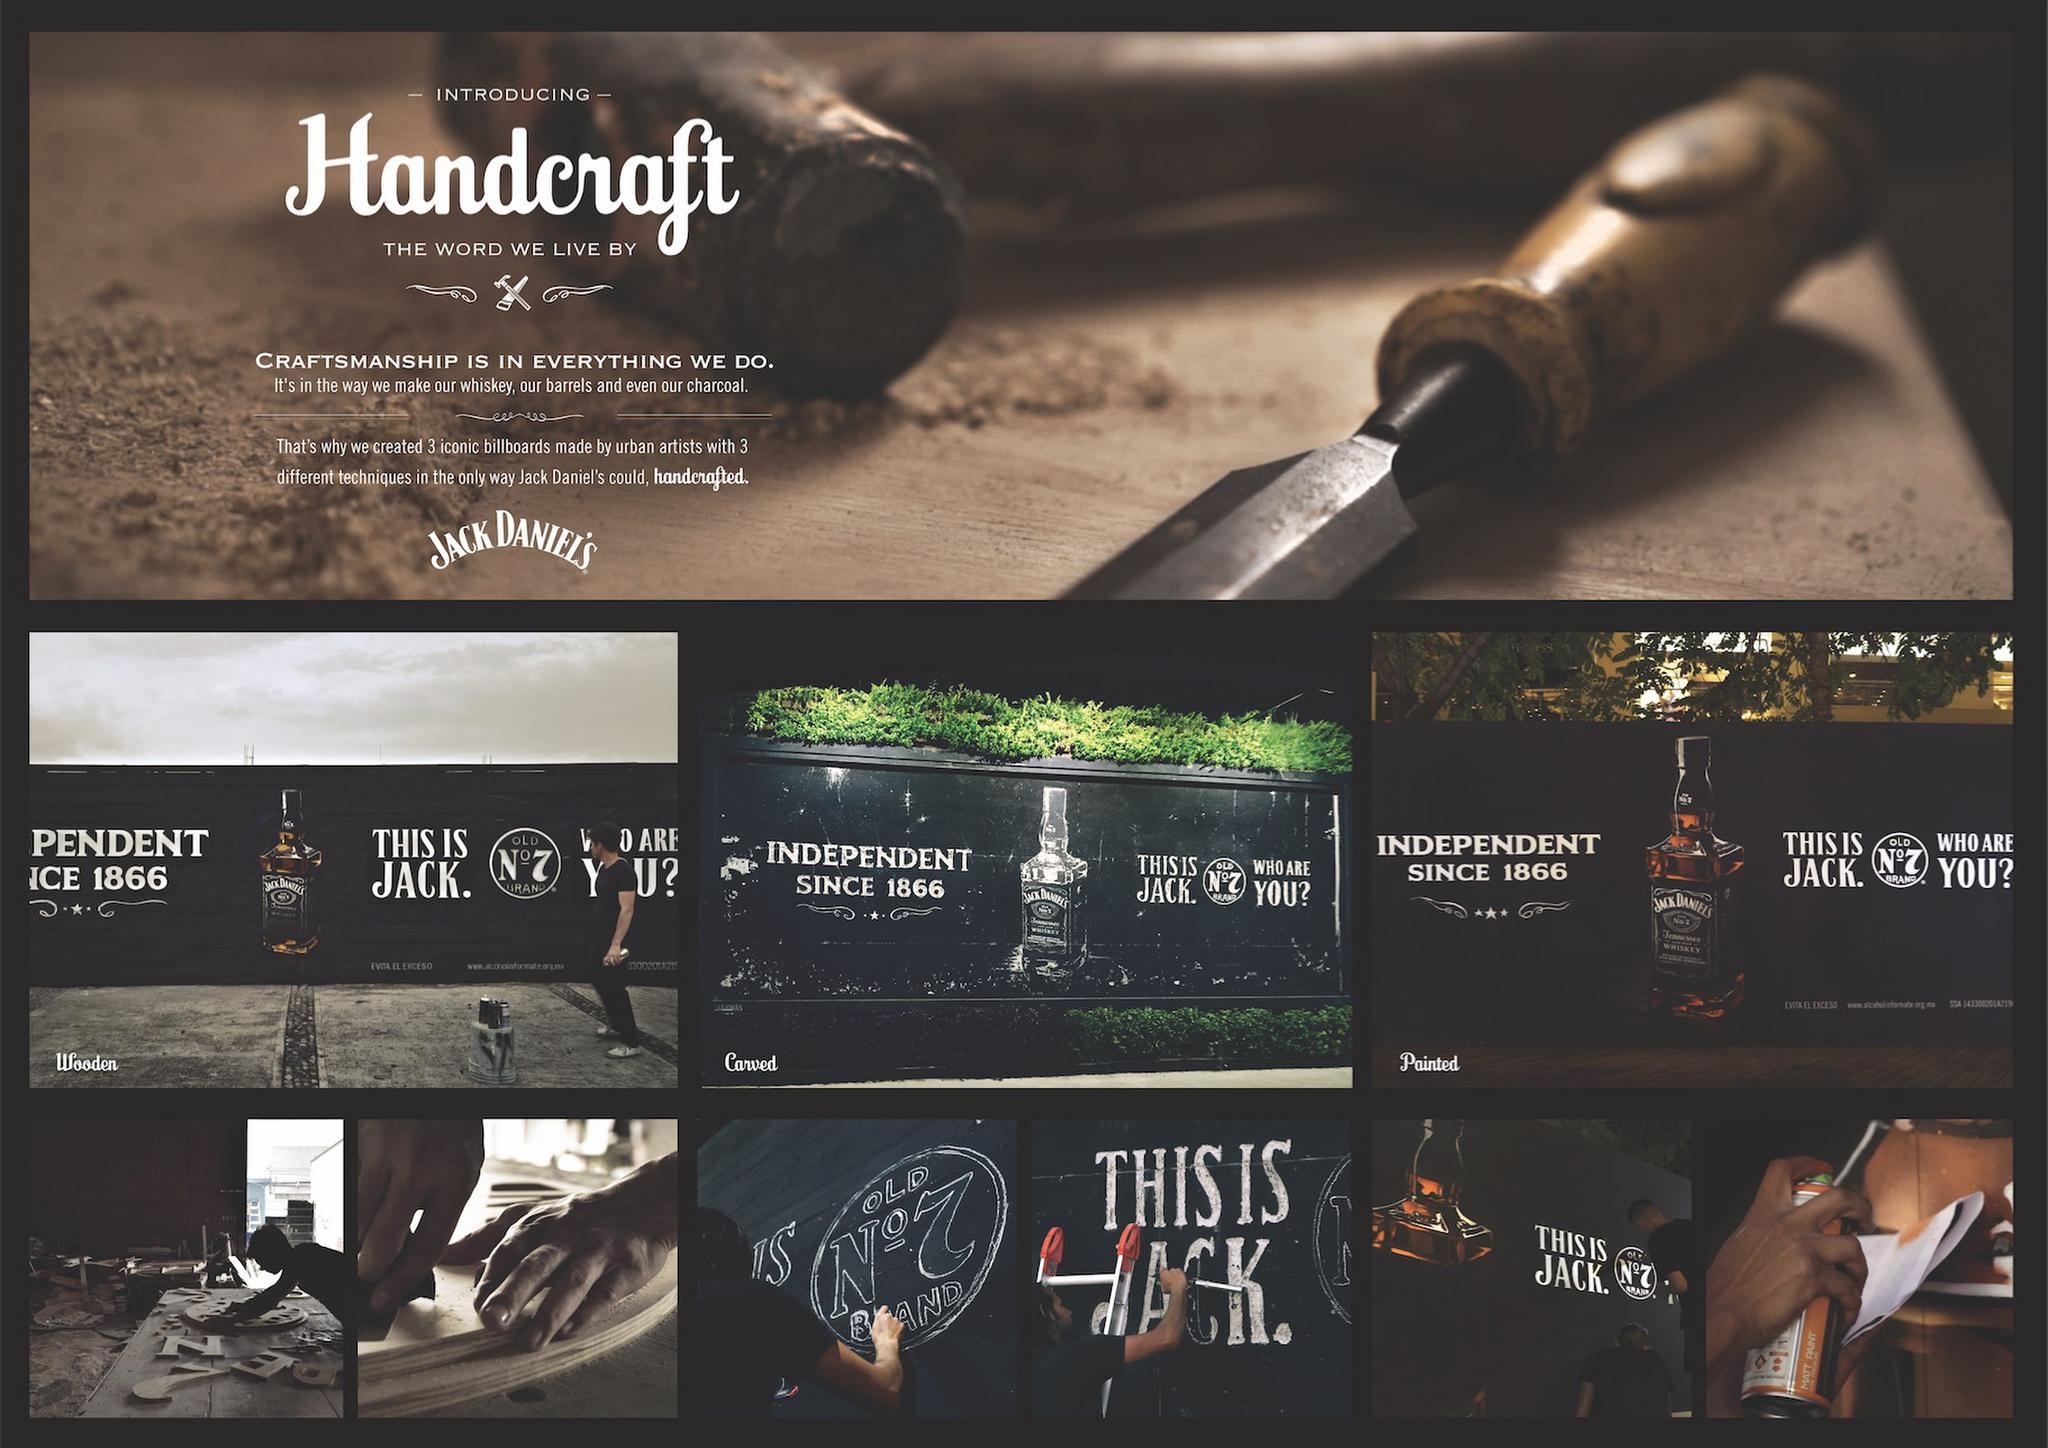 Handcraft: The word we live by